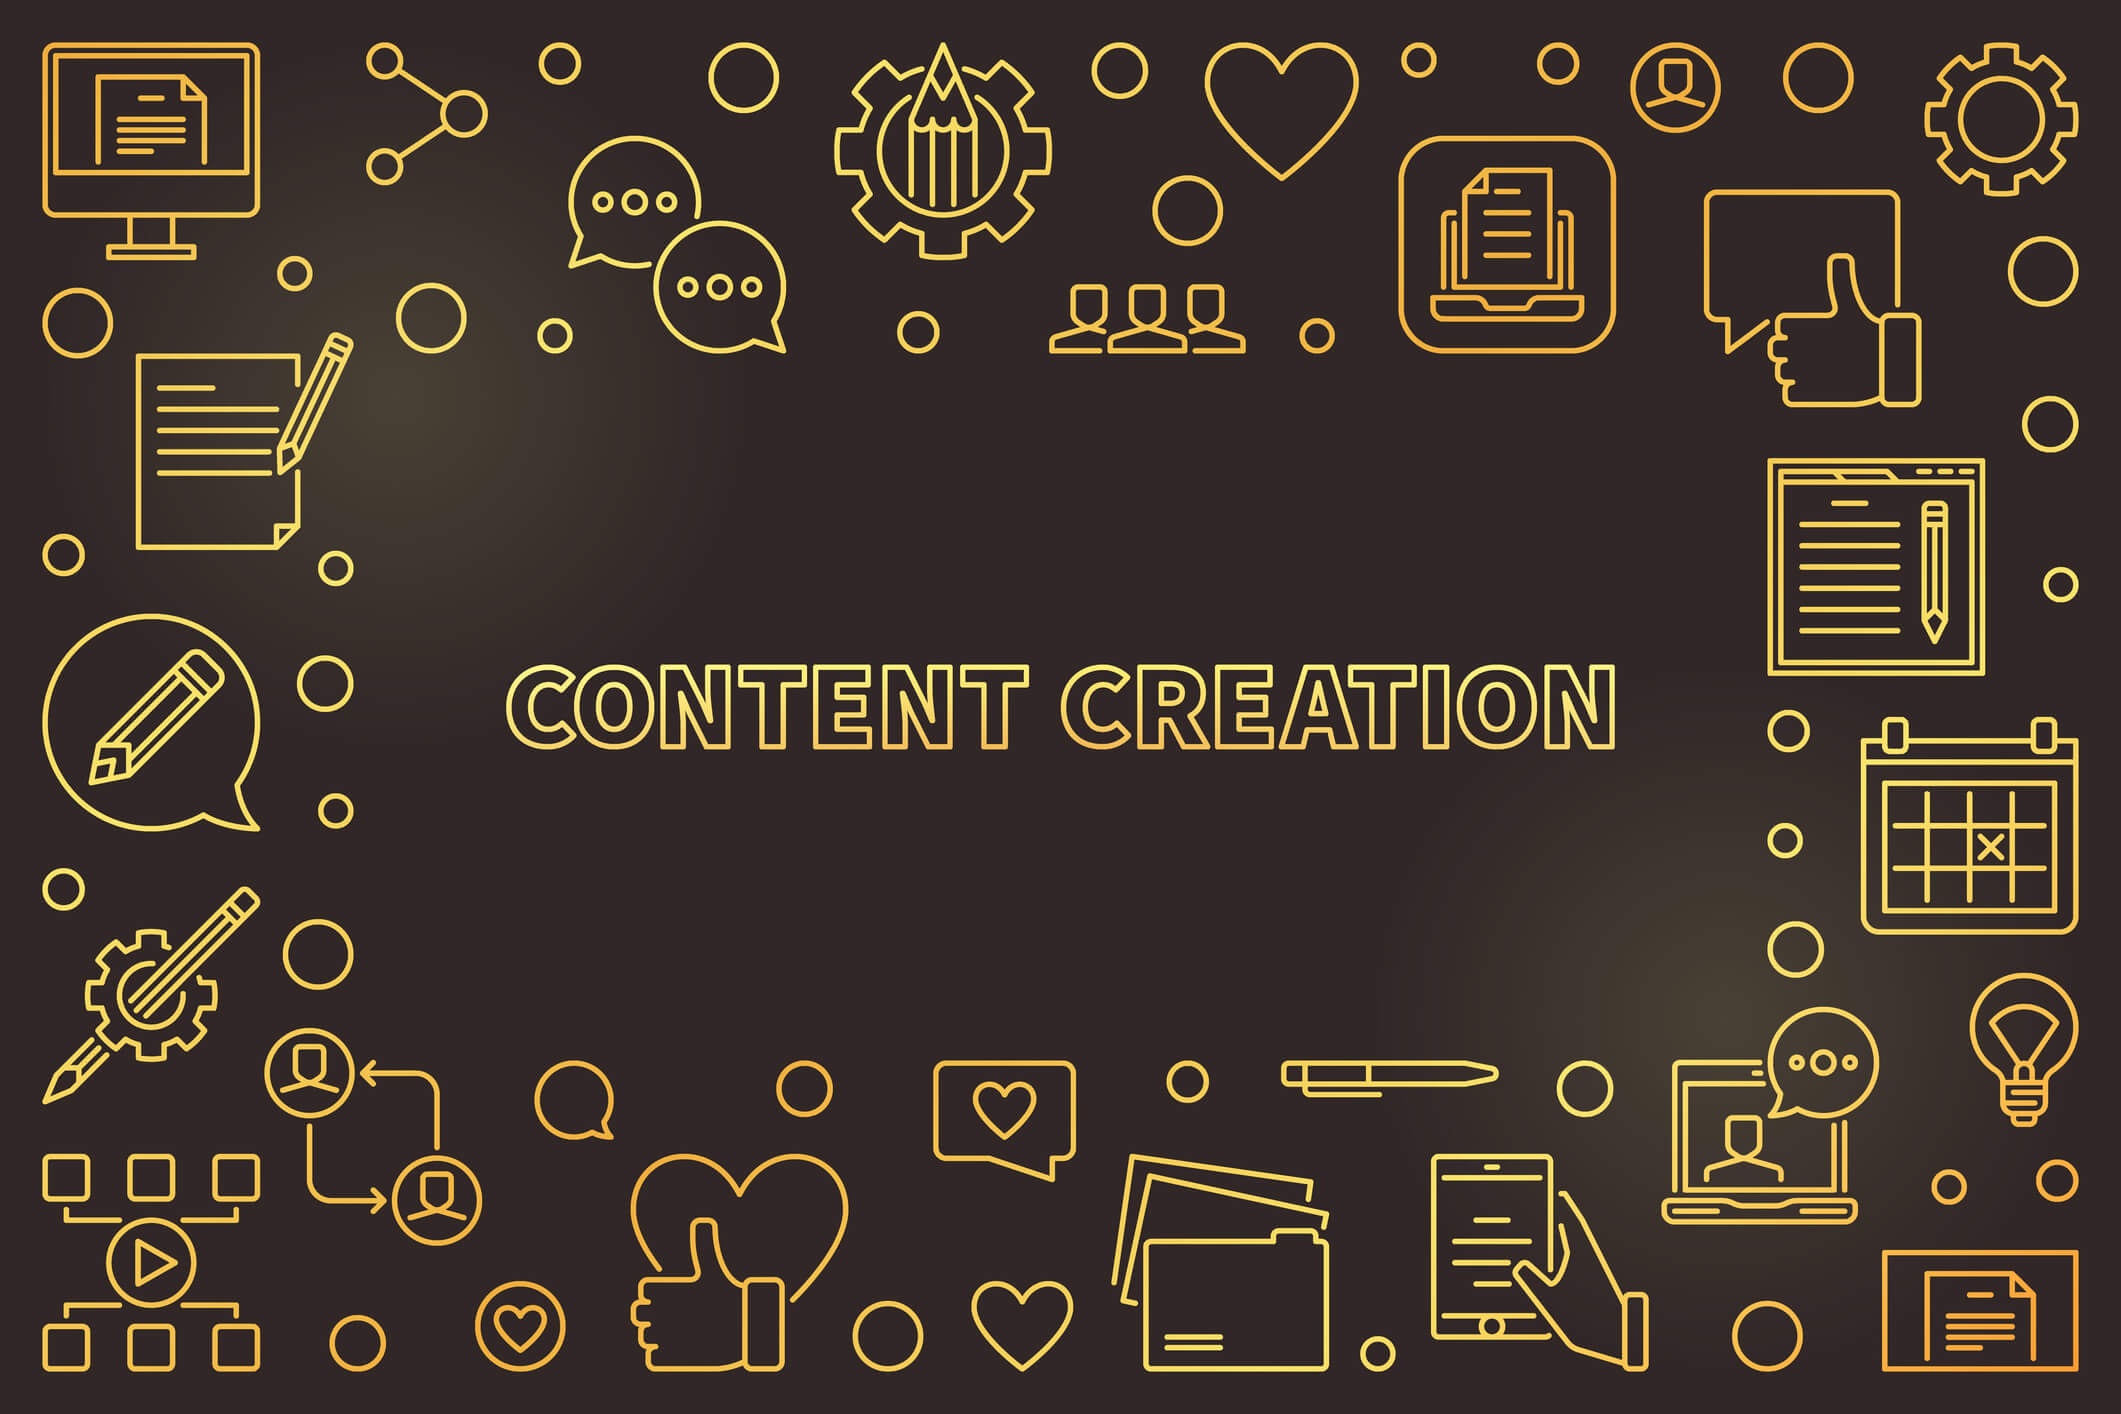 Content Creation with social media reaction icons